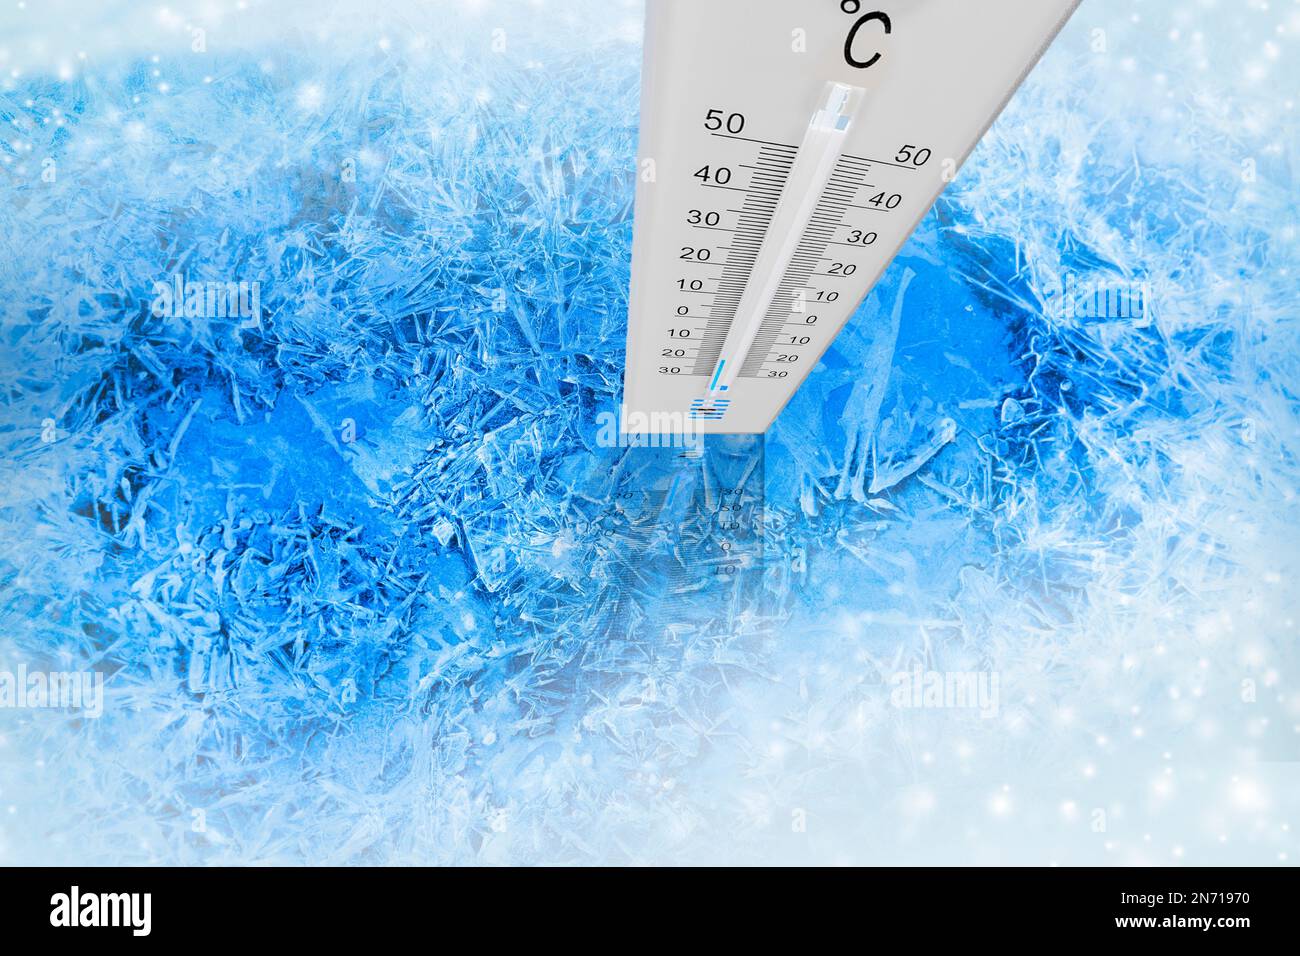 https://c8.alamy.com/comp/2N71970/thermometer-with-temperature-display-ice-cold-2N71970.jpg